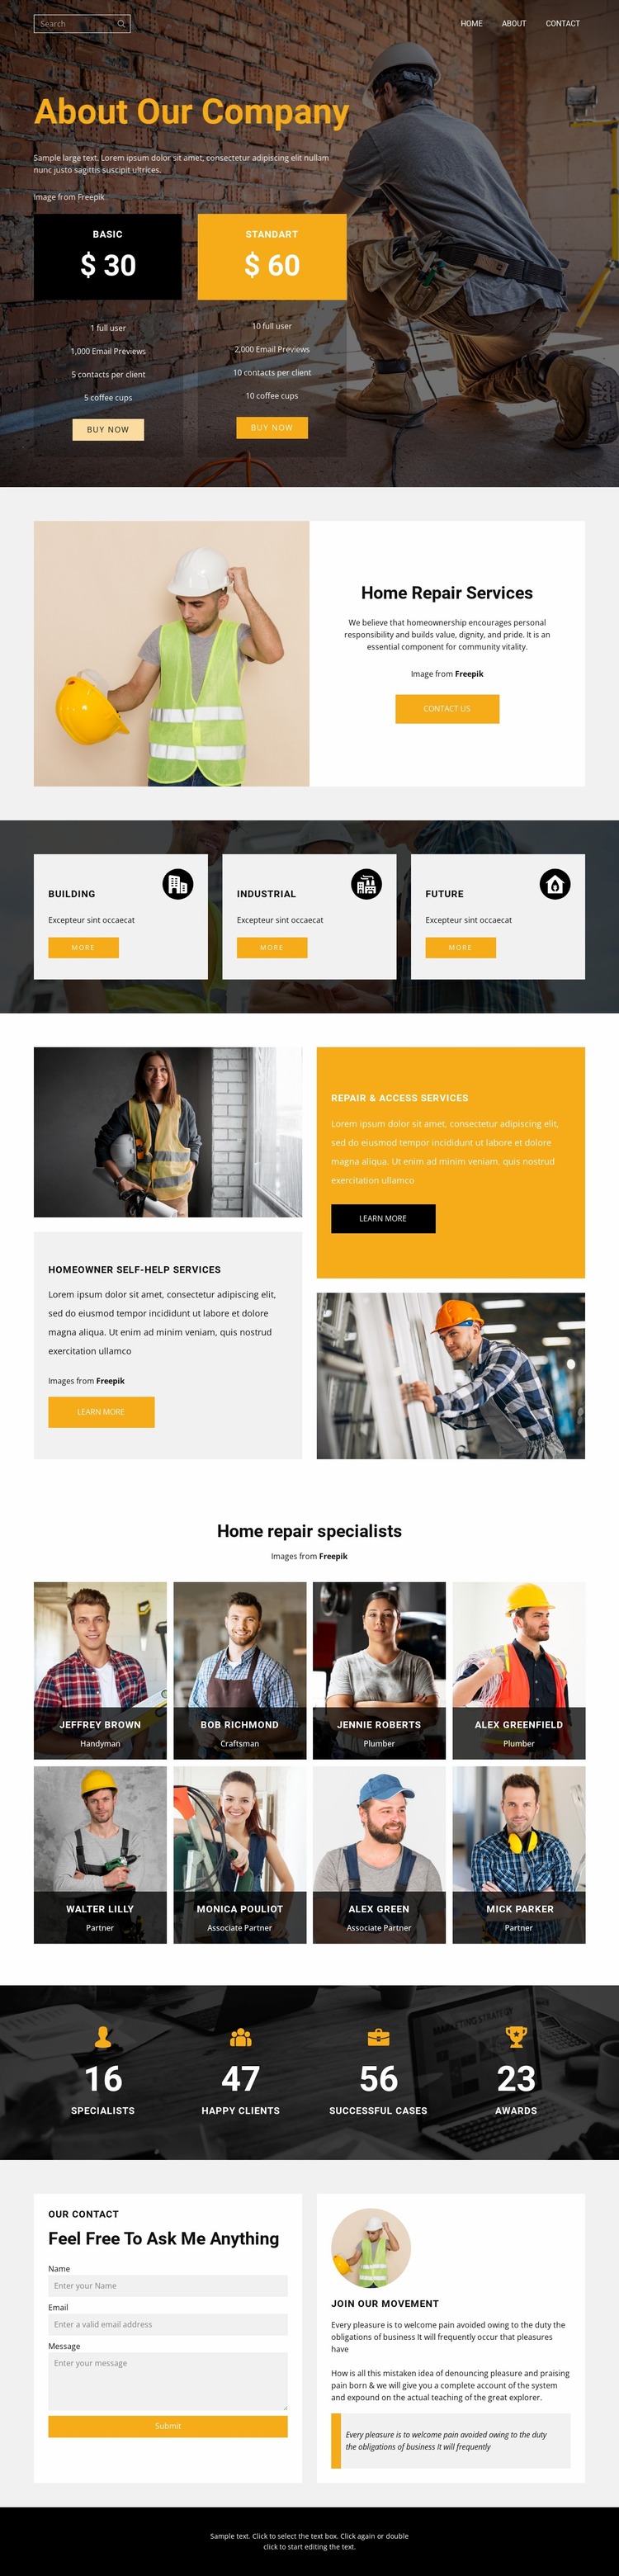 We will build a better home Website Mockup